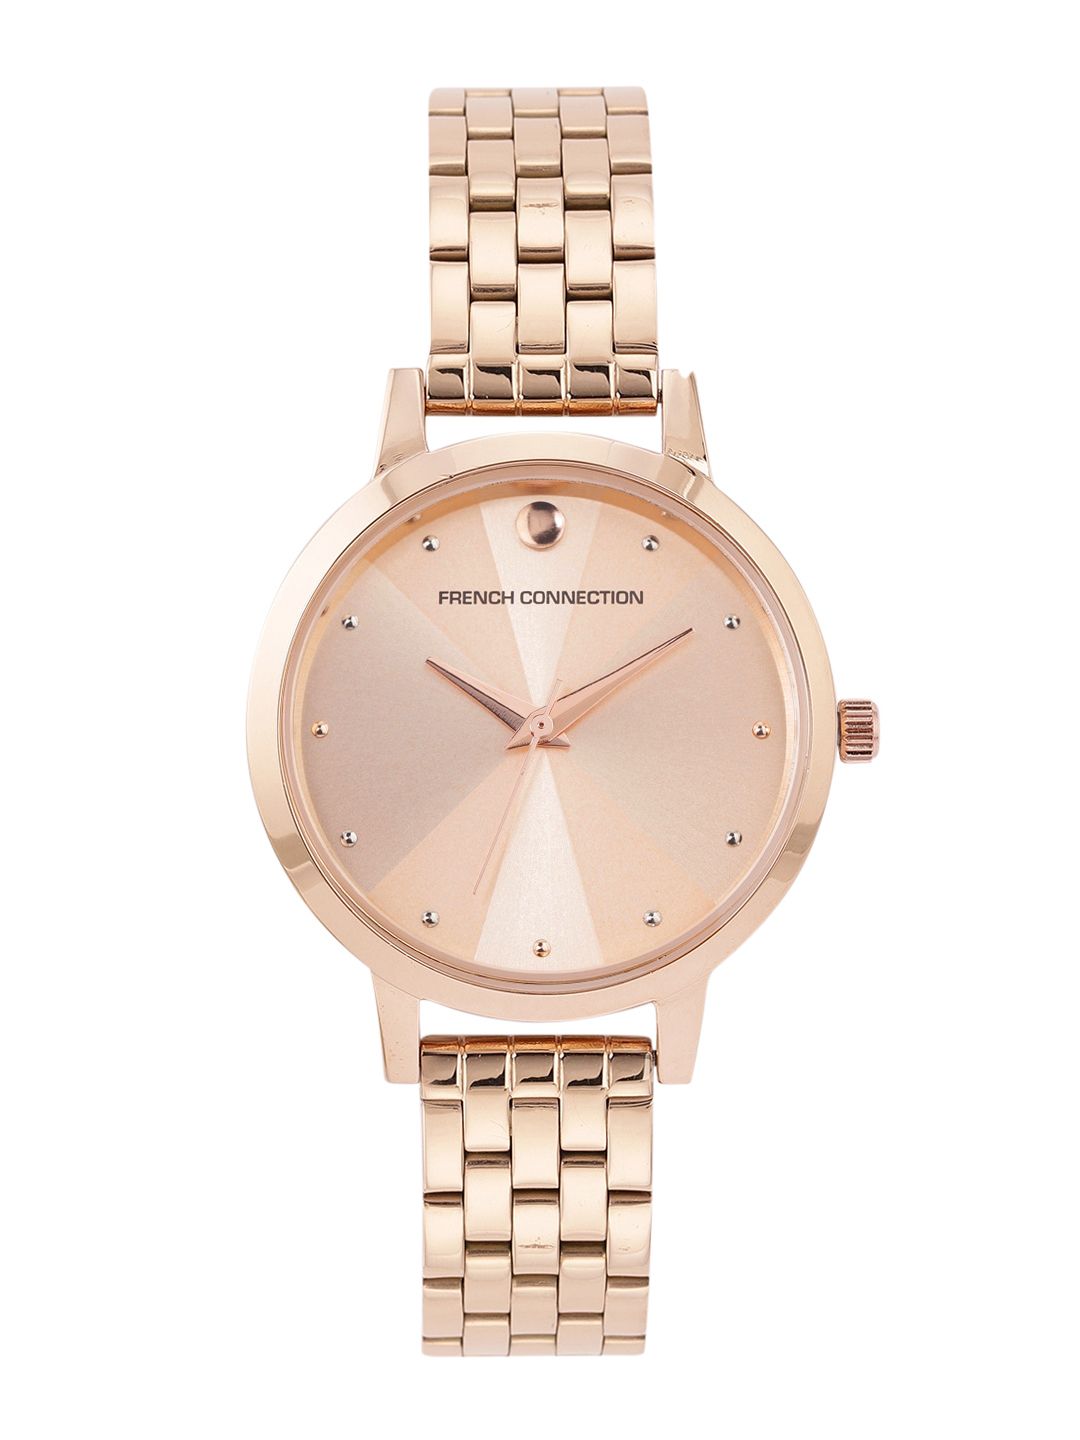 French Connection Women Rose Gold-Toned Patterned Stainless Steel Bracelet Style Watch Price in India